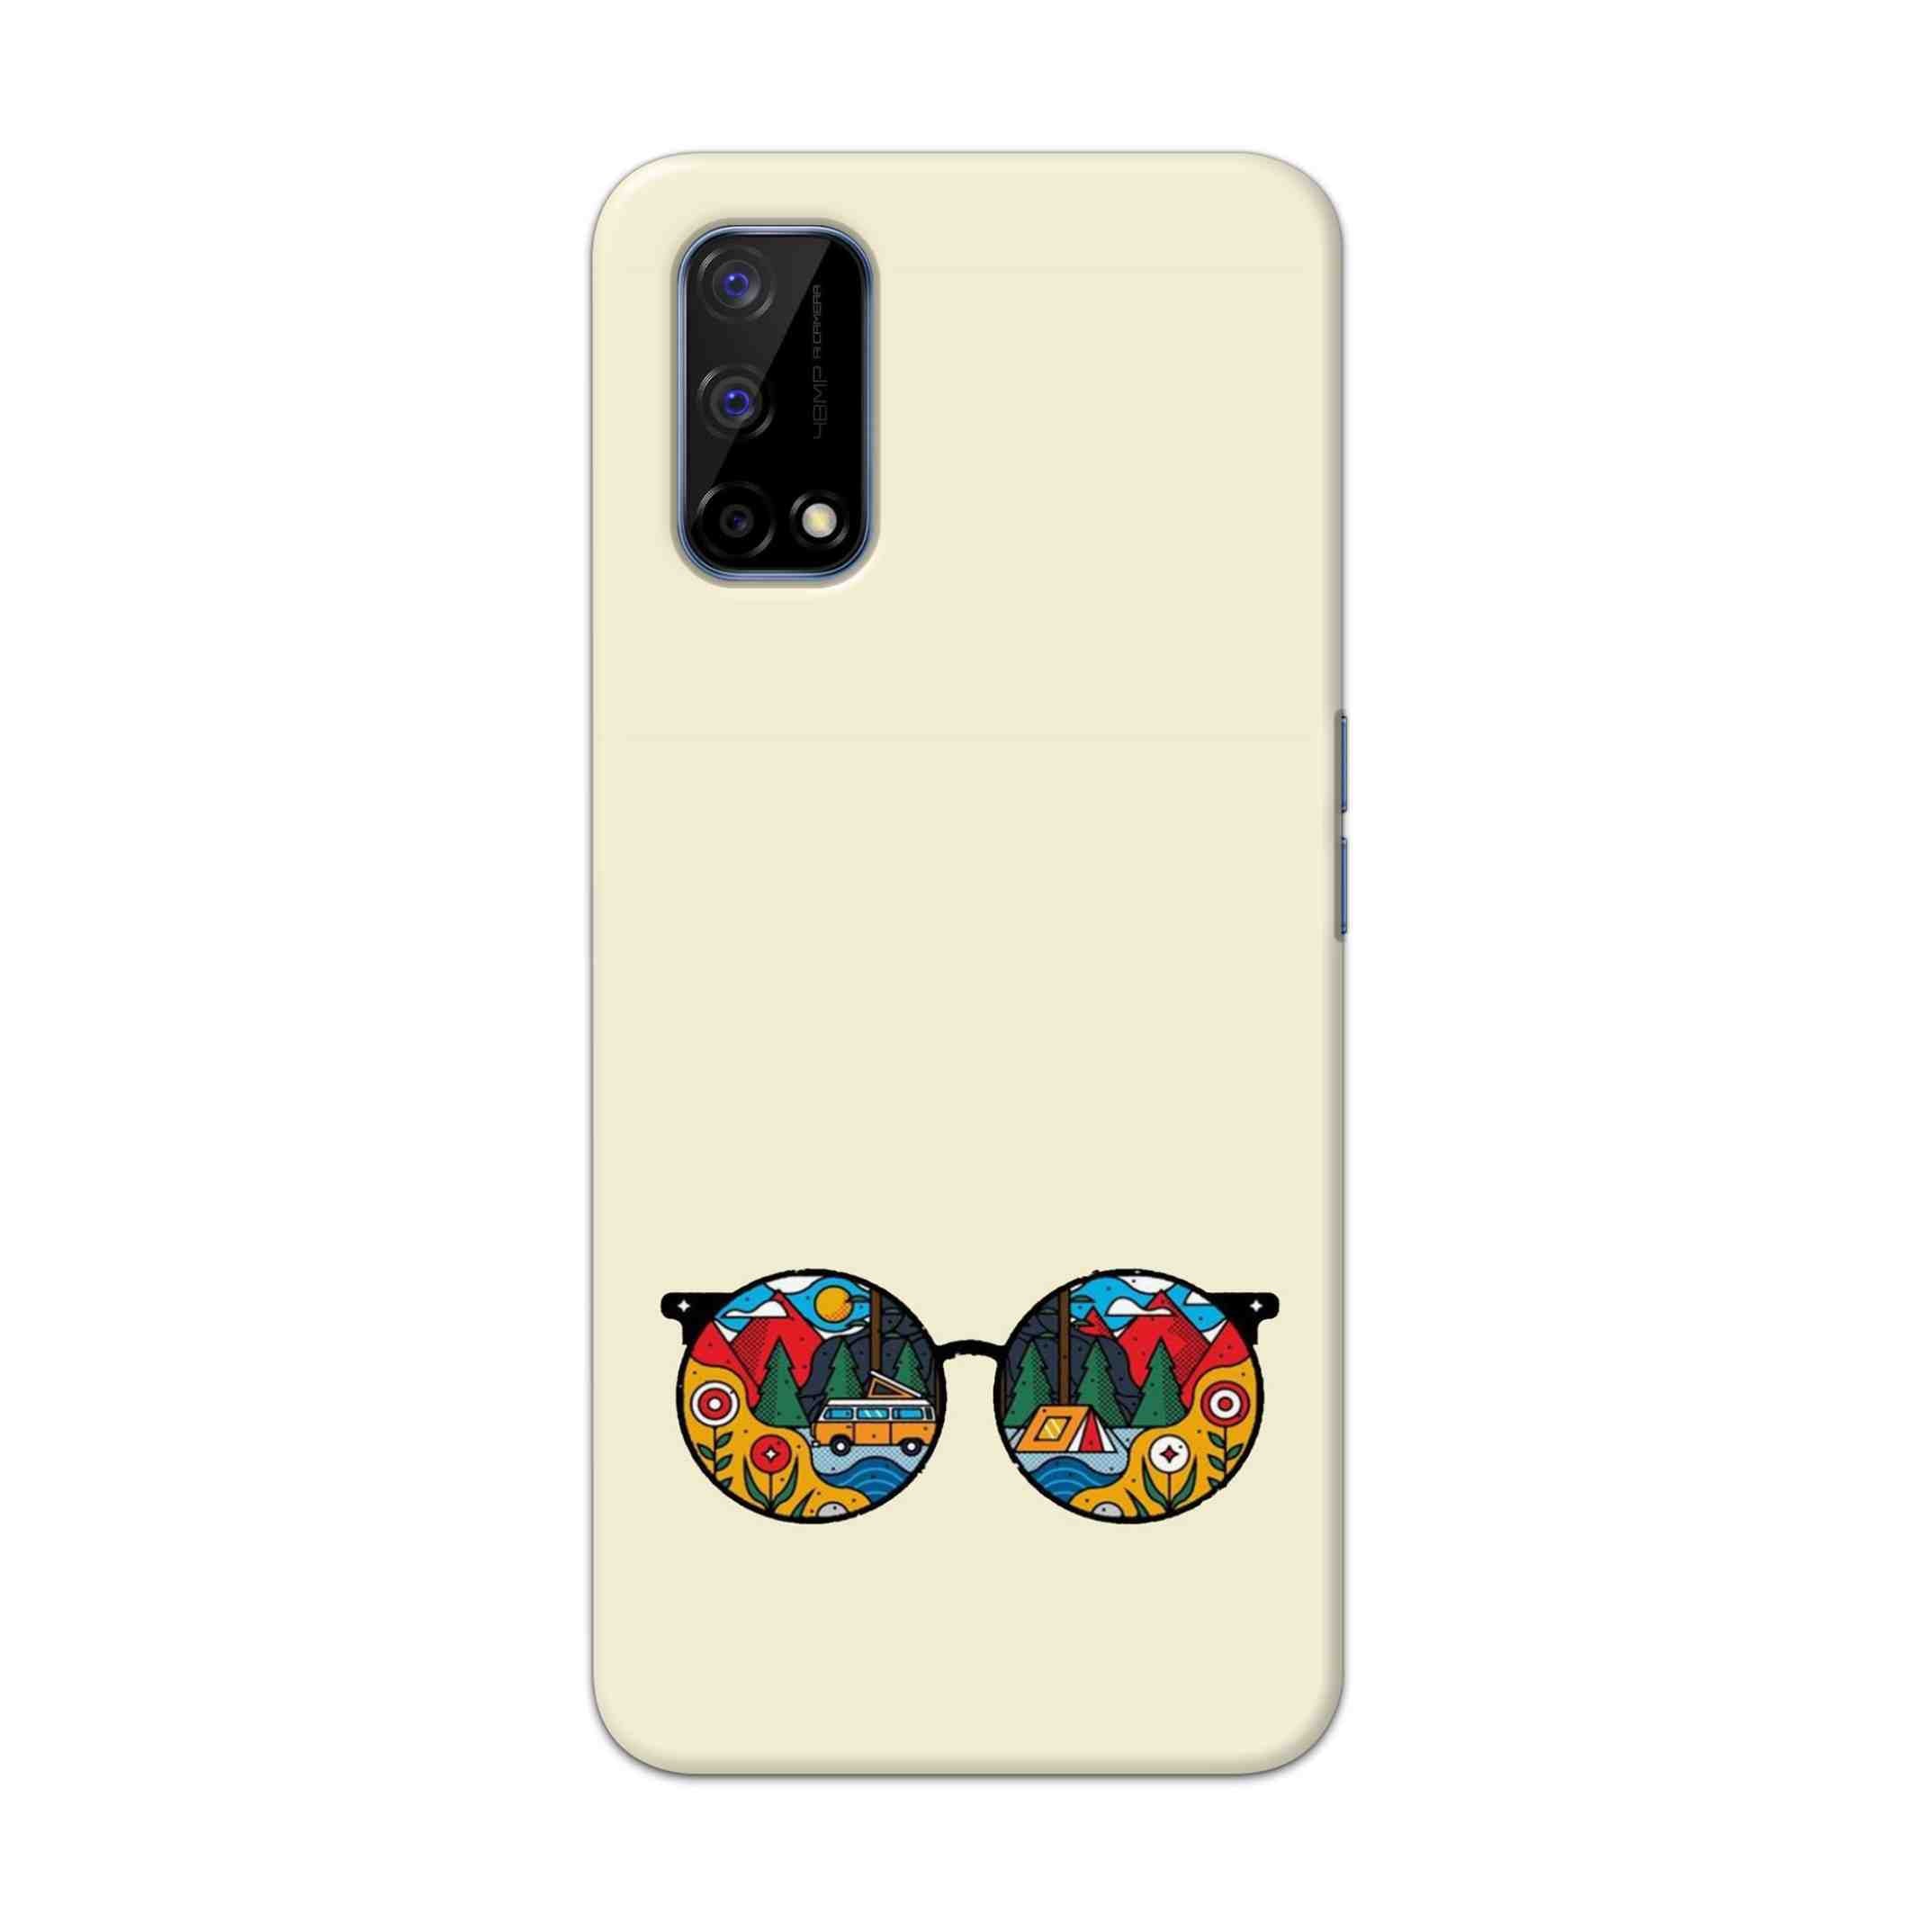 Buy Rainbow Sunglasses Hard Back Mobile Phone Case Cover For Realme Narzo 30 Pro Online